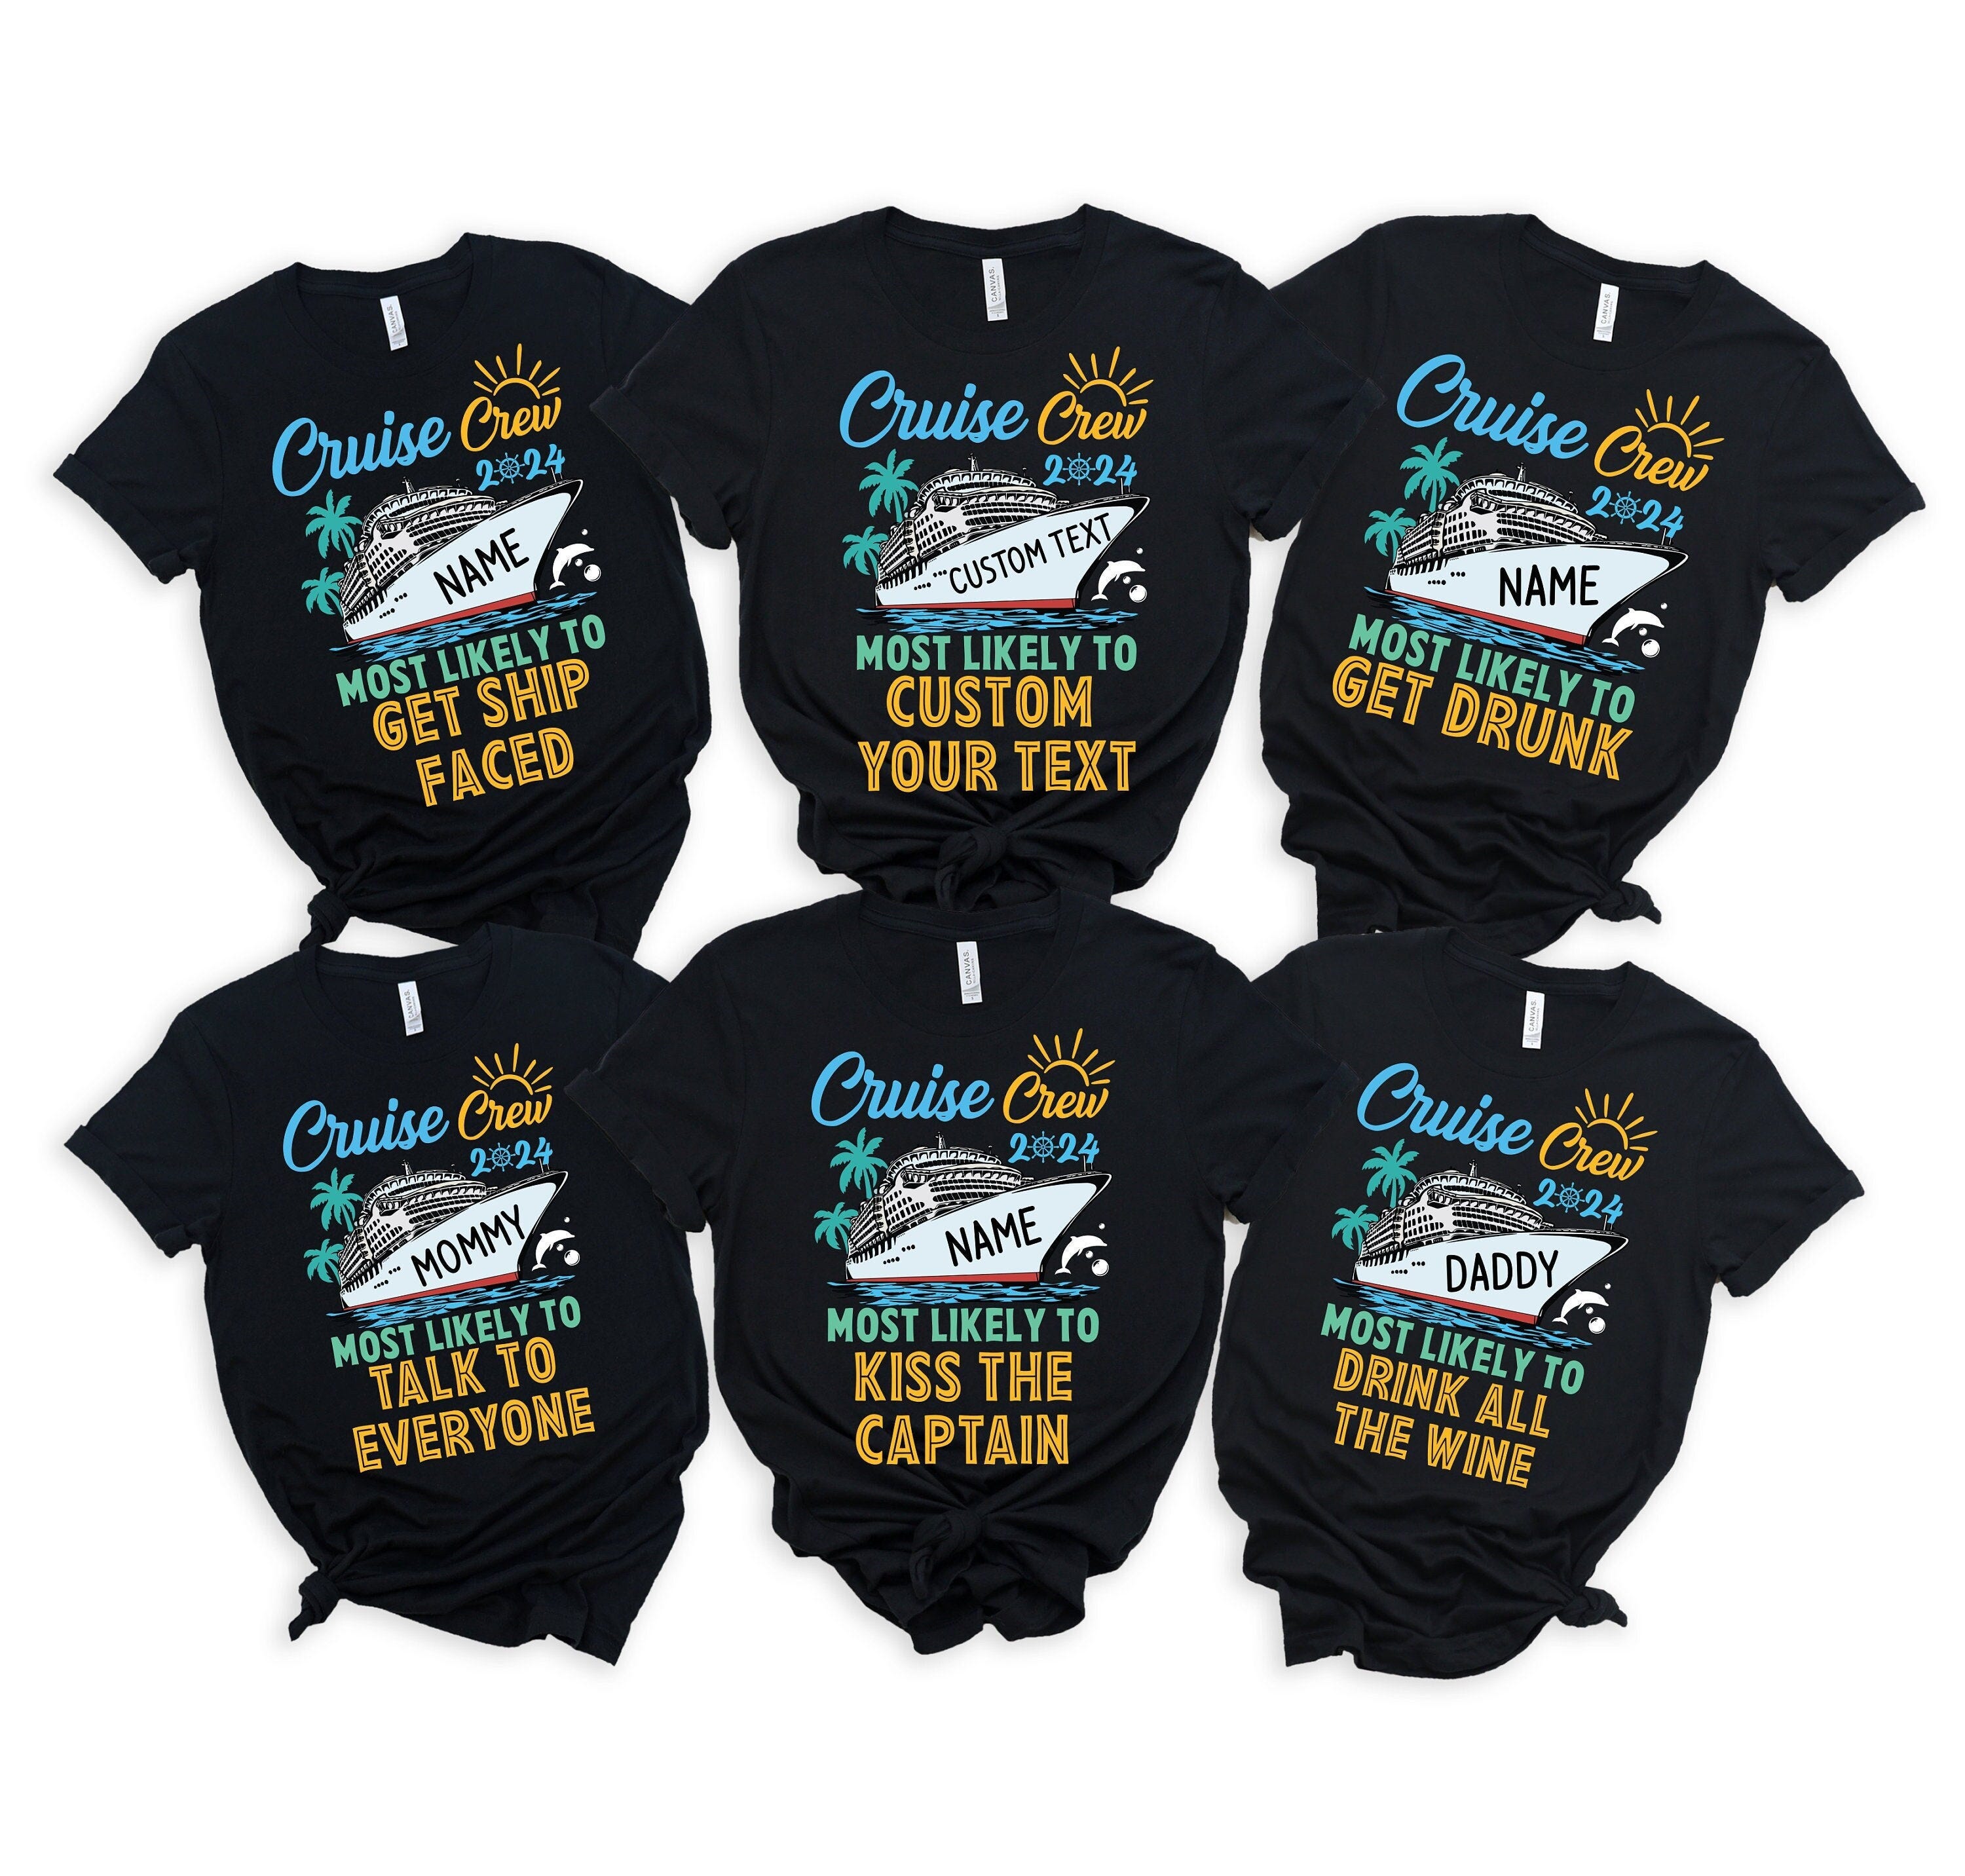 Custom and 40 Quotes Cruise Crew 2024 Most Likely to Shirt, Custom Name Cruise Crew Shirt, Funny Matching Cruise Shirt, Cruise Shirt, Cruise